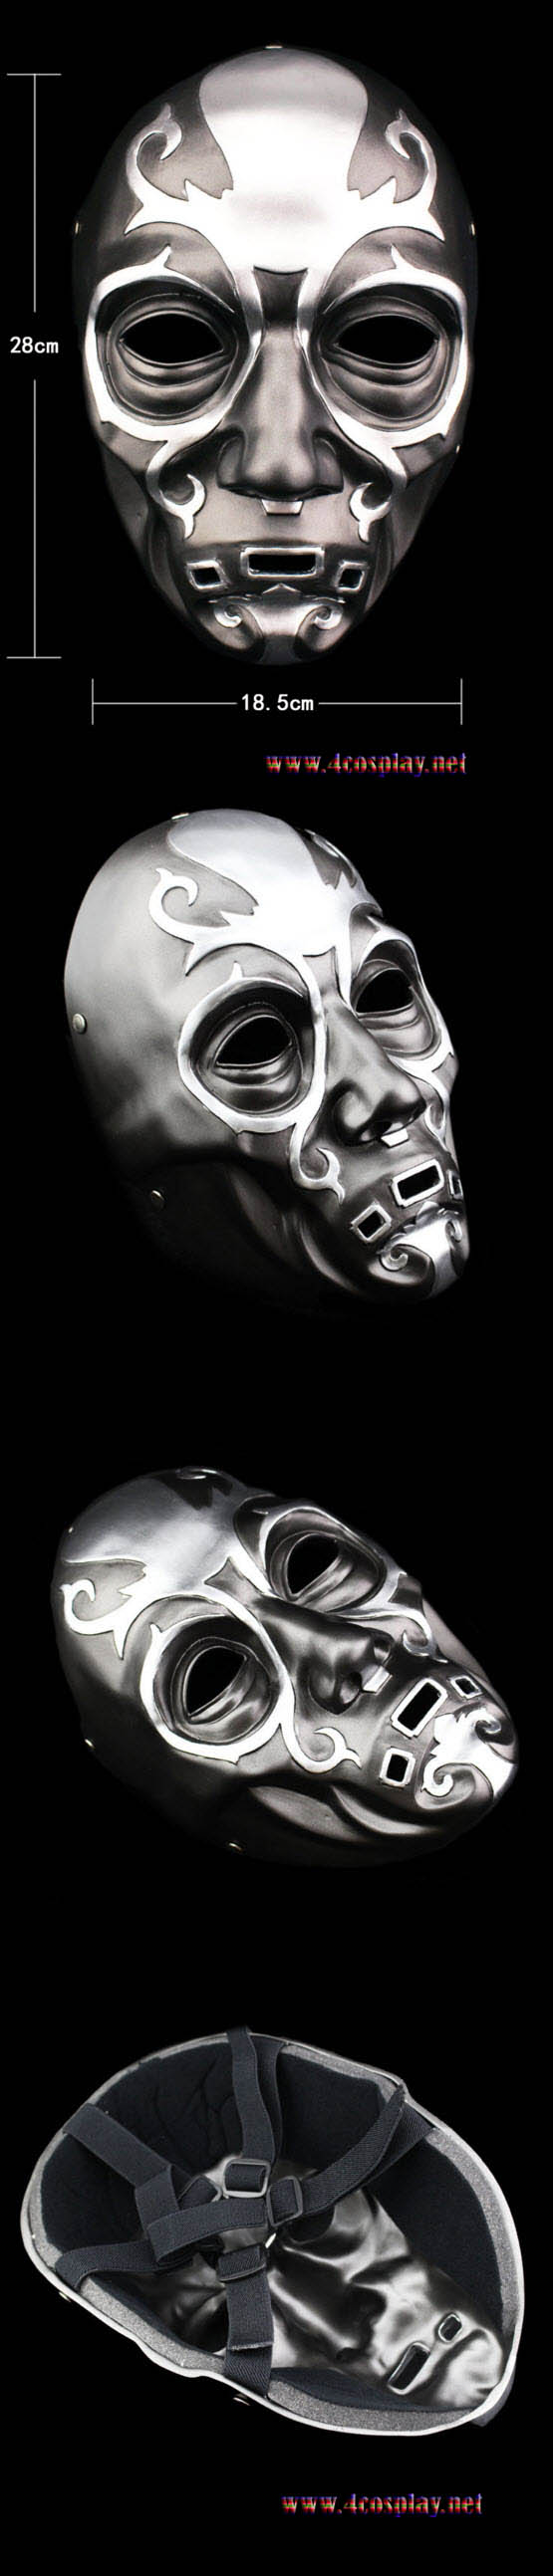 Collector's Edition Harry Potter Death Eater Horror Mask